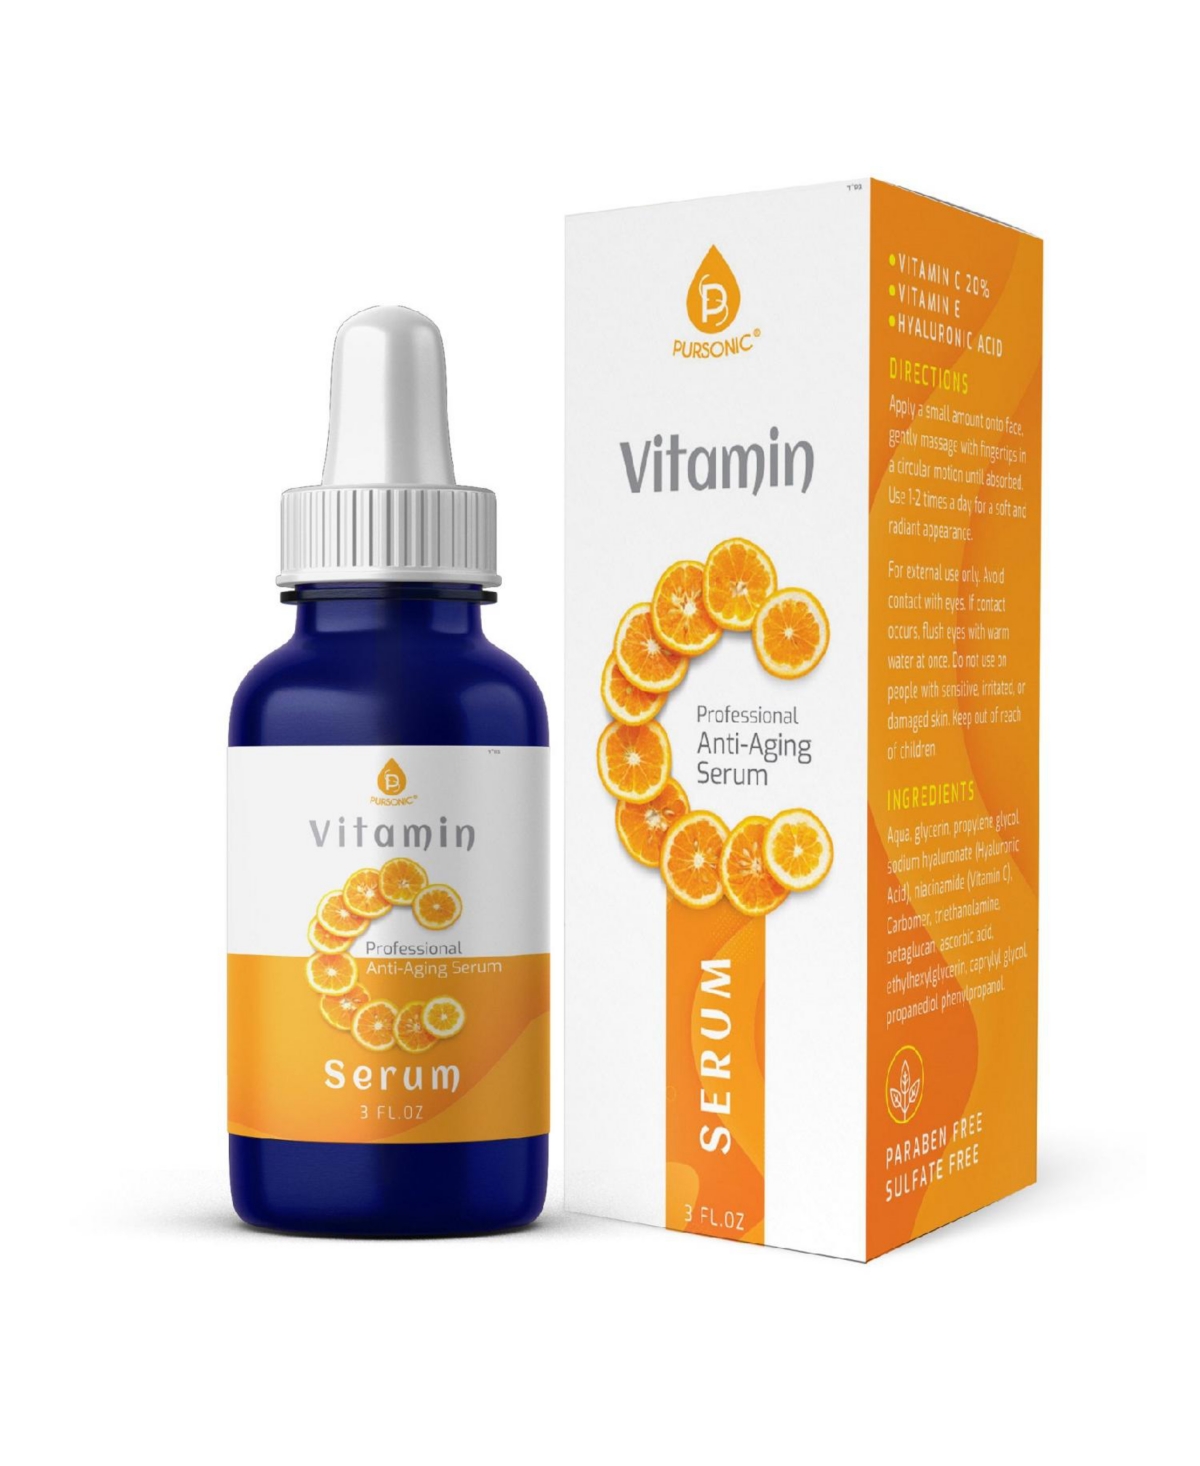 Vitamin C Serum, 20% is a high potency Best Organic Anti-Aging Moisturizer Serum for Face, Neck & DAcollete and Eye Treatment ( 4 fl. oz) - B